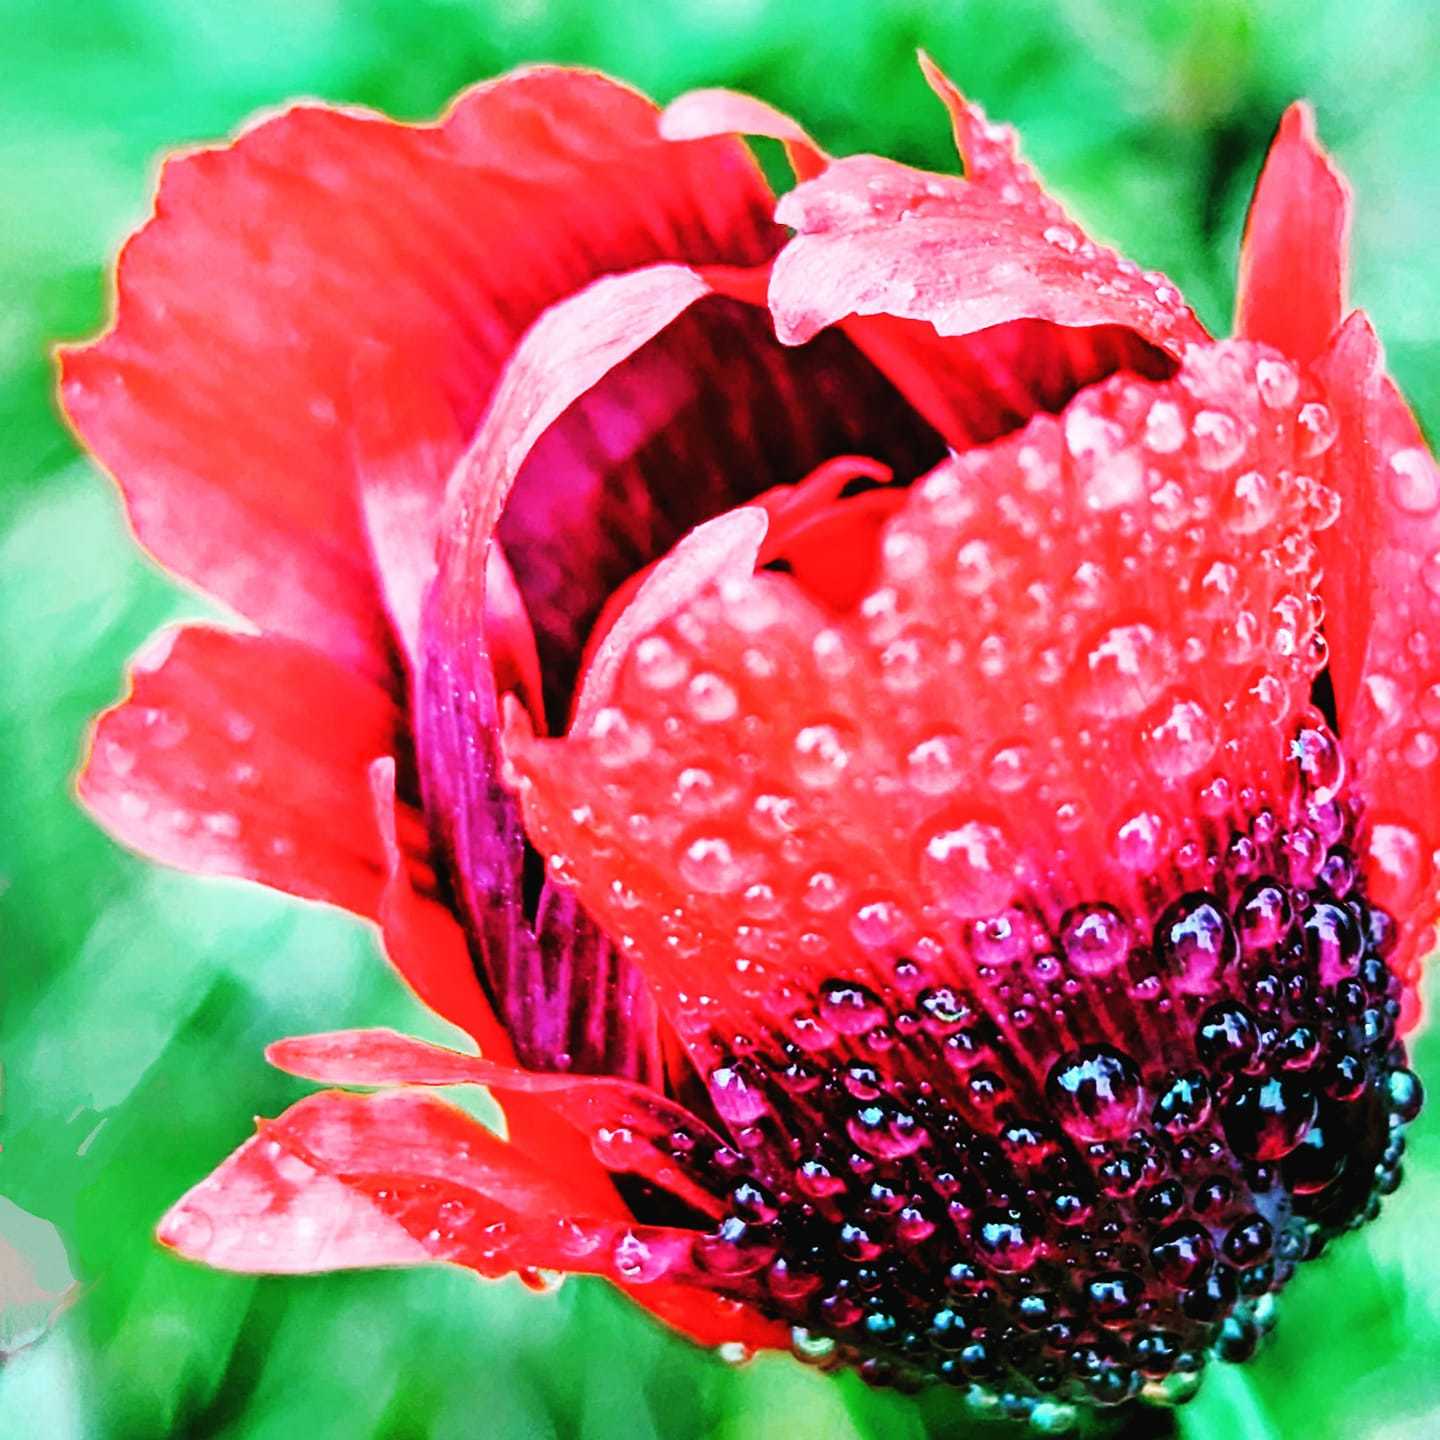 Raindrops on poppies by Ti Buckley